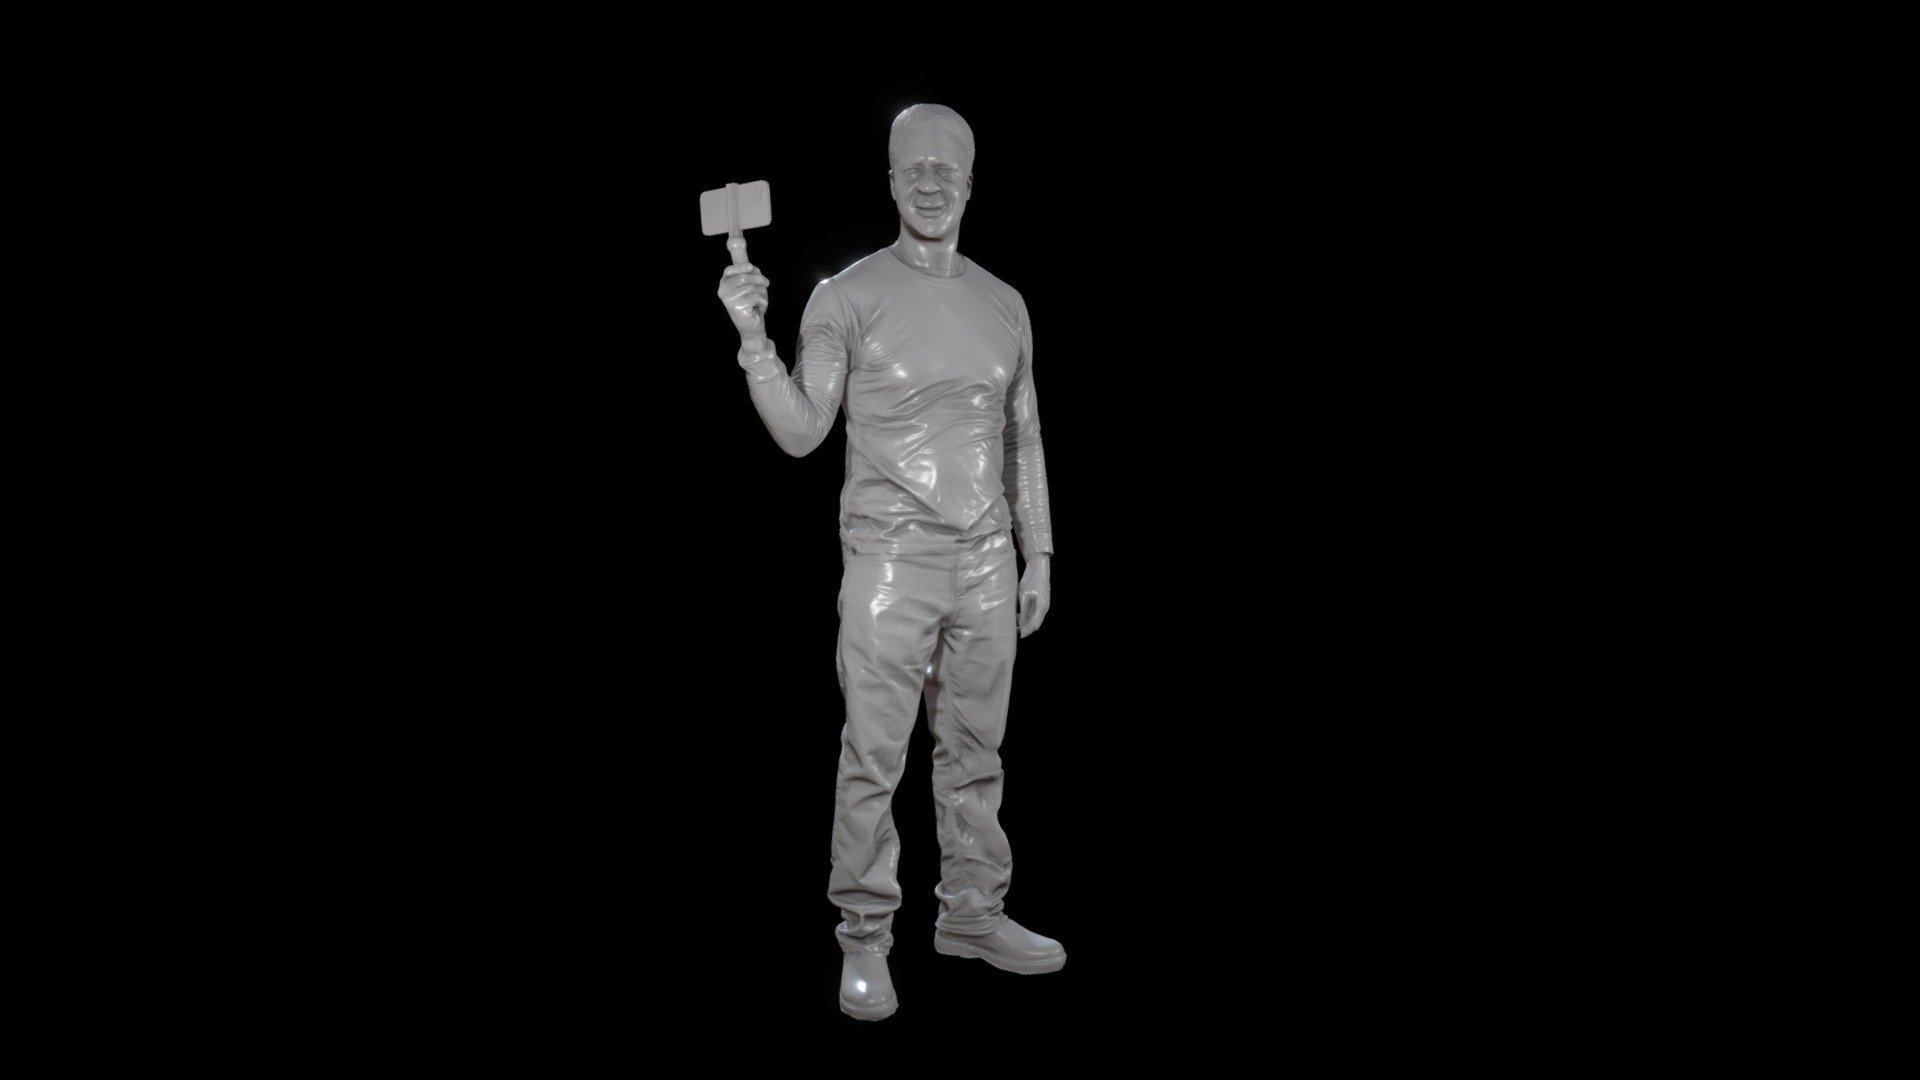 This is a 3D scan taken of Broderick &ldquo;Hollywood